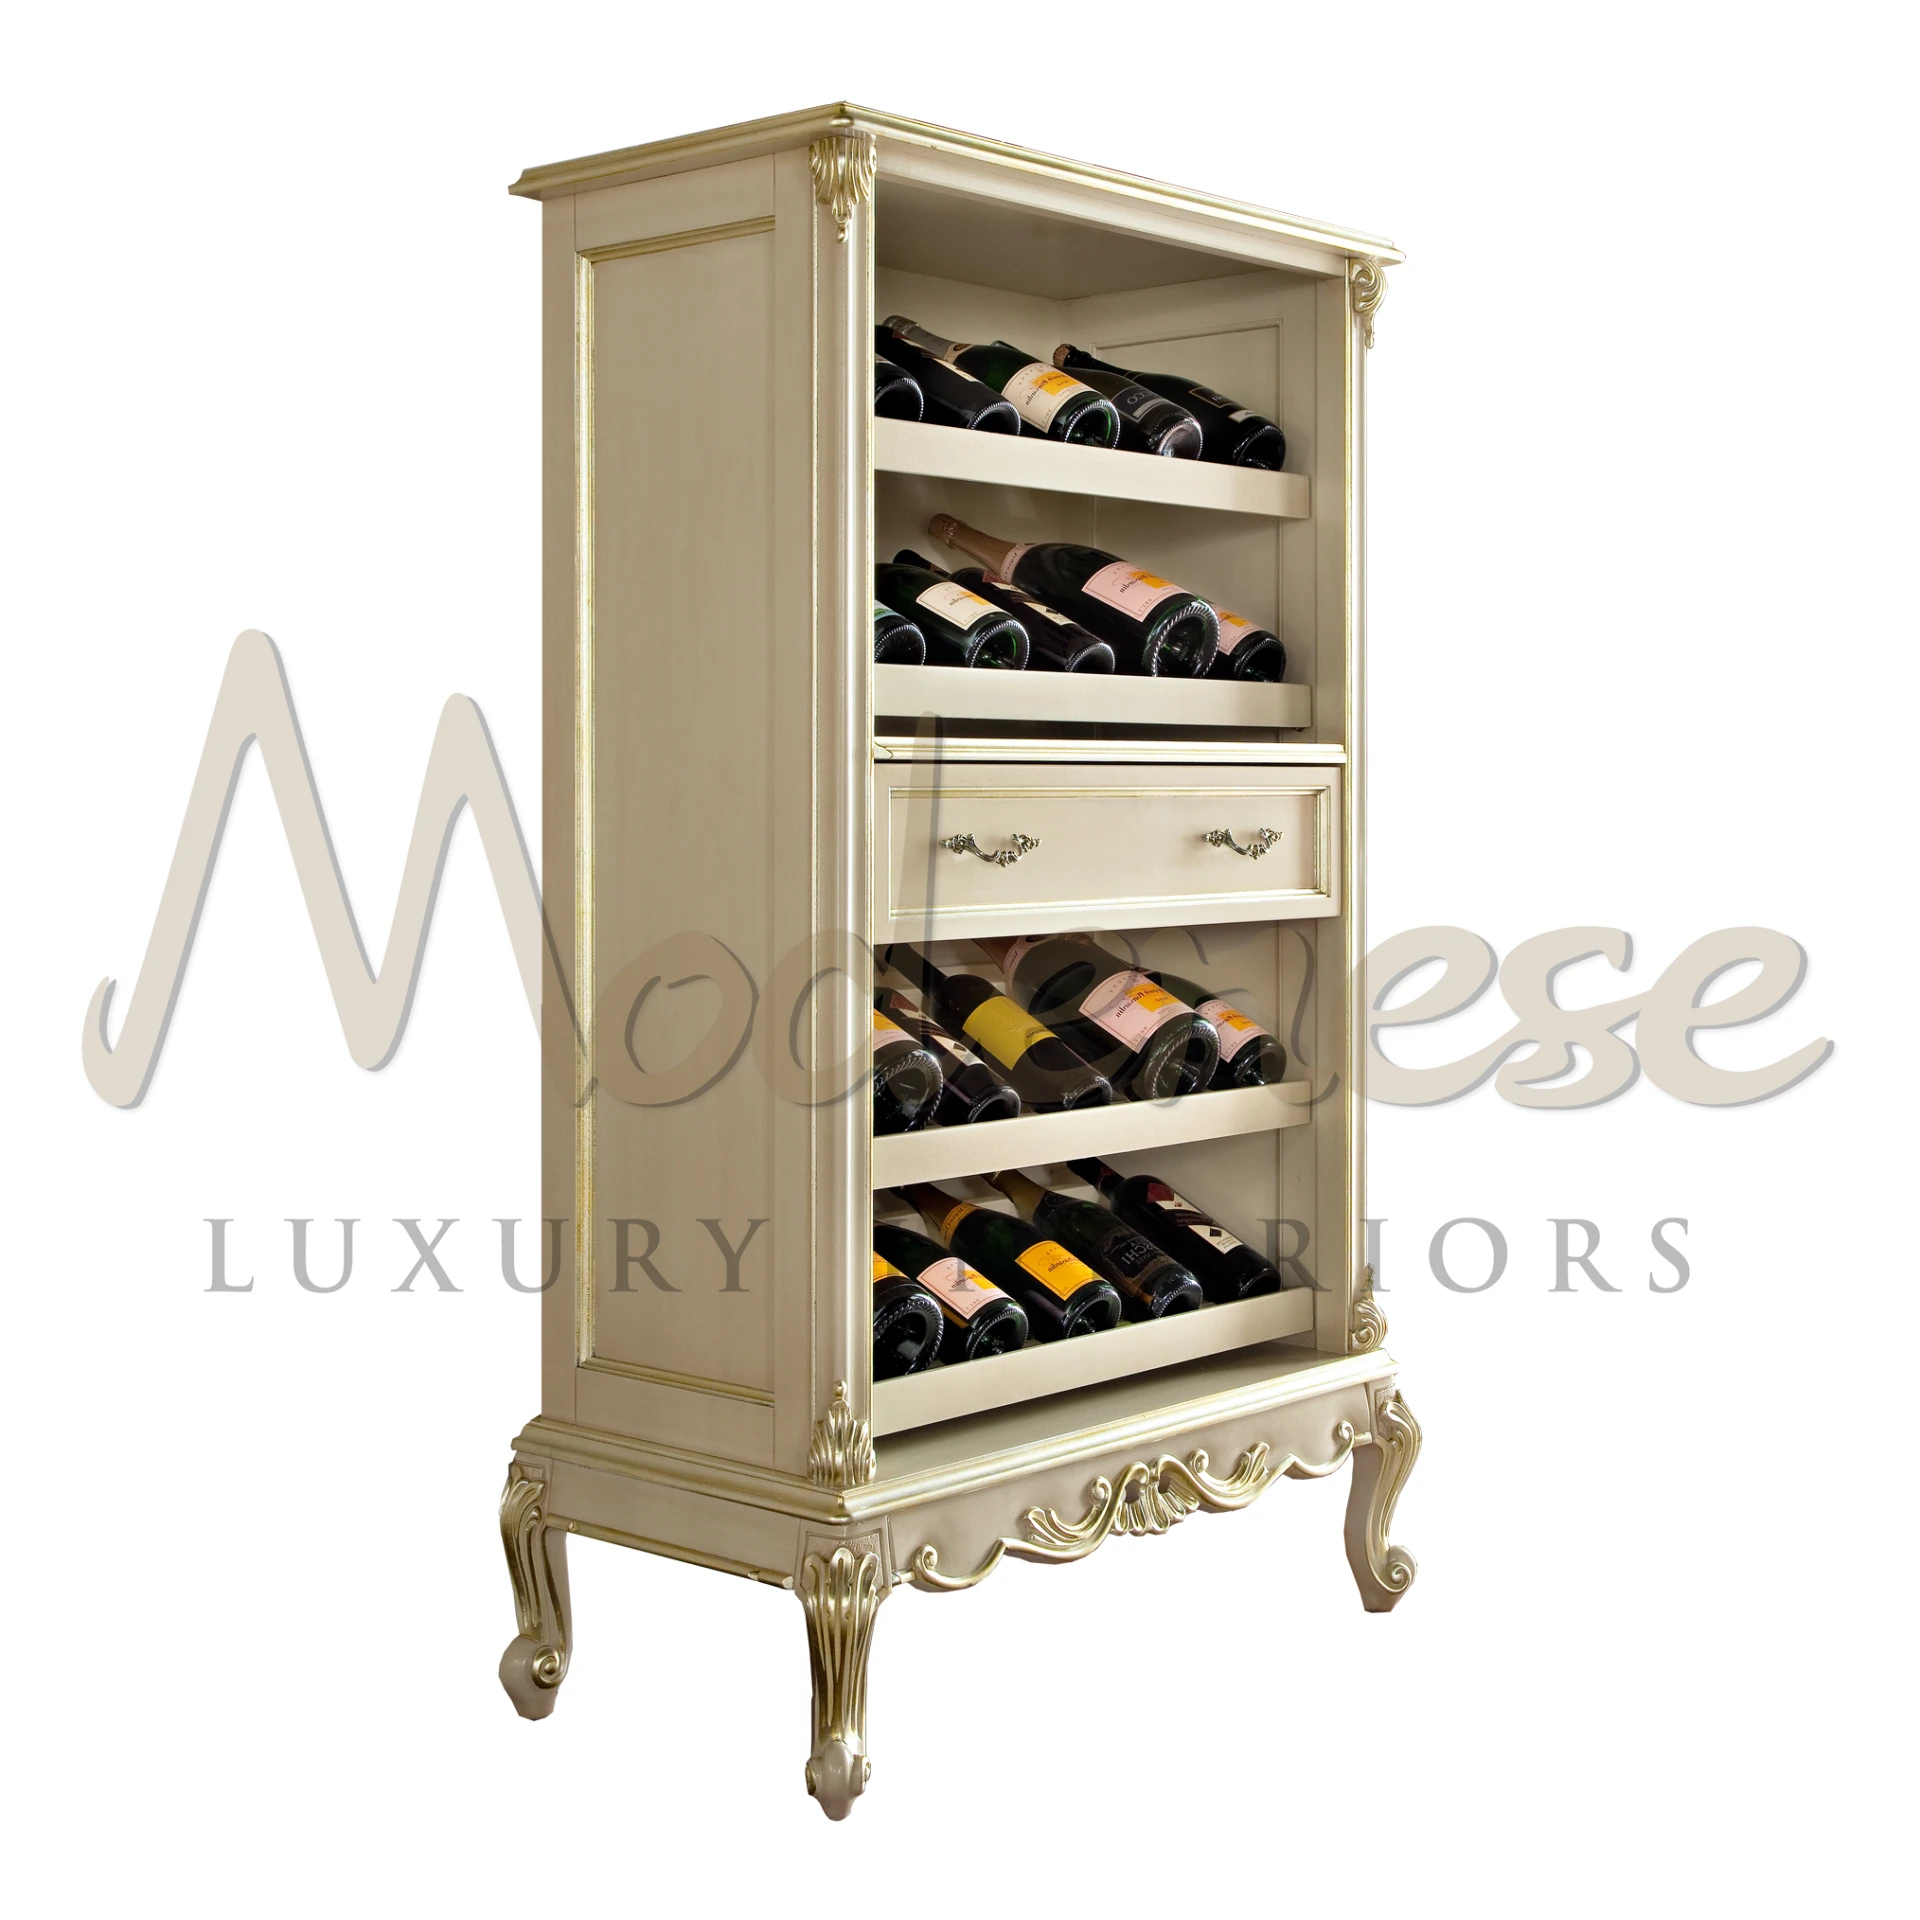 Experience your wine storage with this luxurious bottle rack, featuring solid wood construction, ivory lacquer, and elegant gold leaf accents.